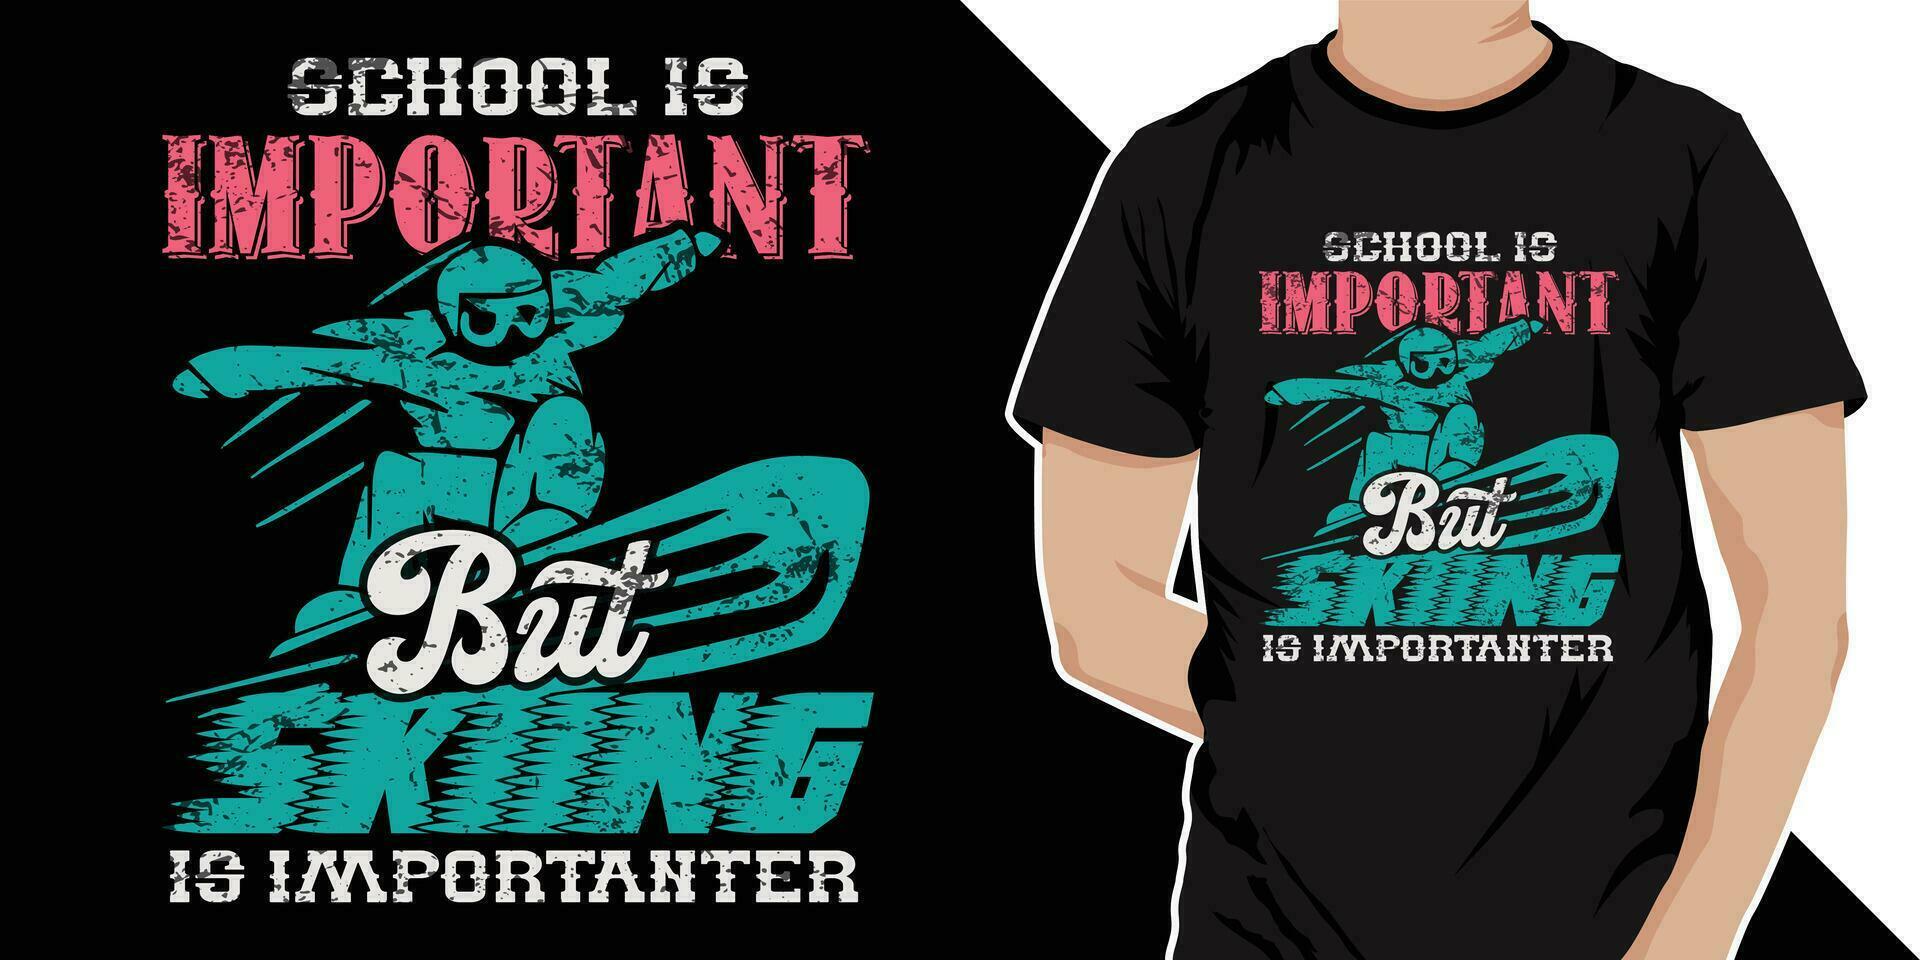 School is important but skiing to importanter t shirt design - Skiing snowboarding vintage t shirt design vector